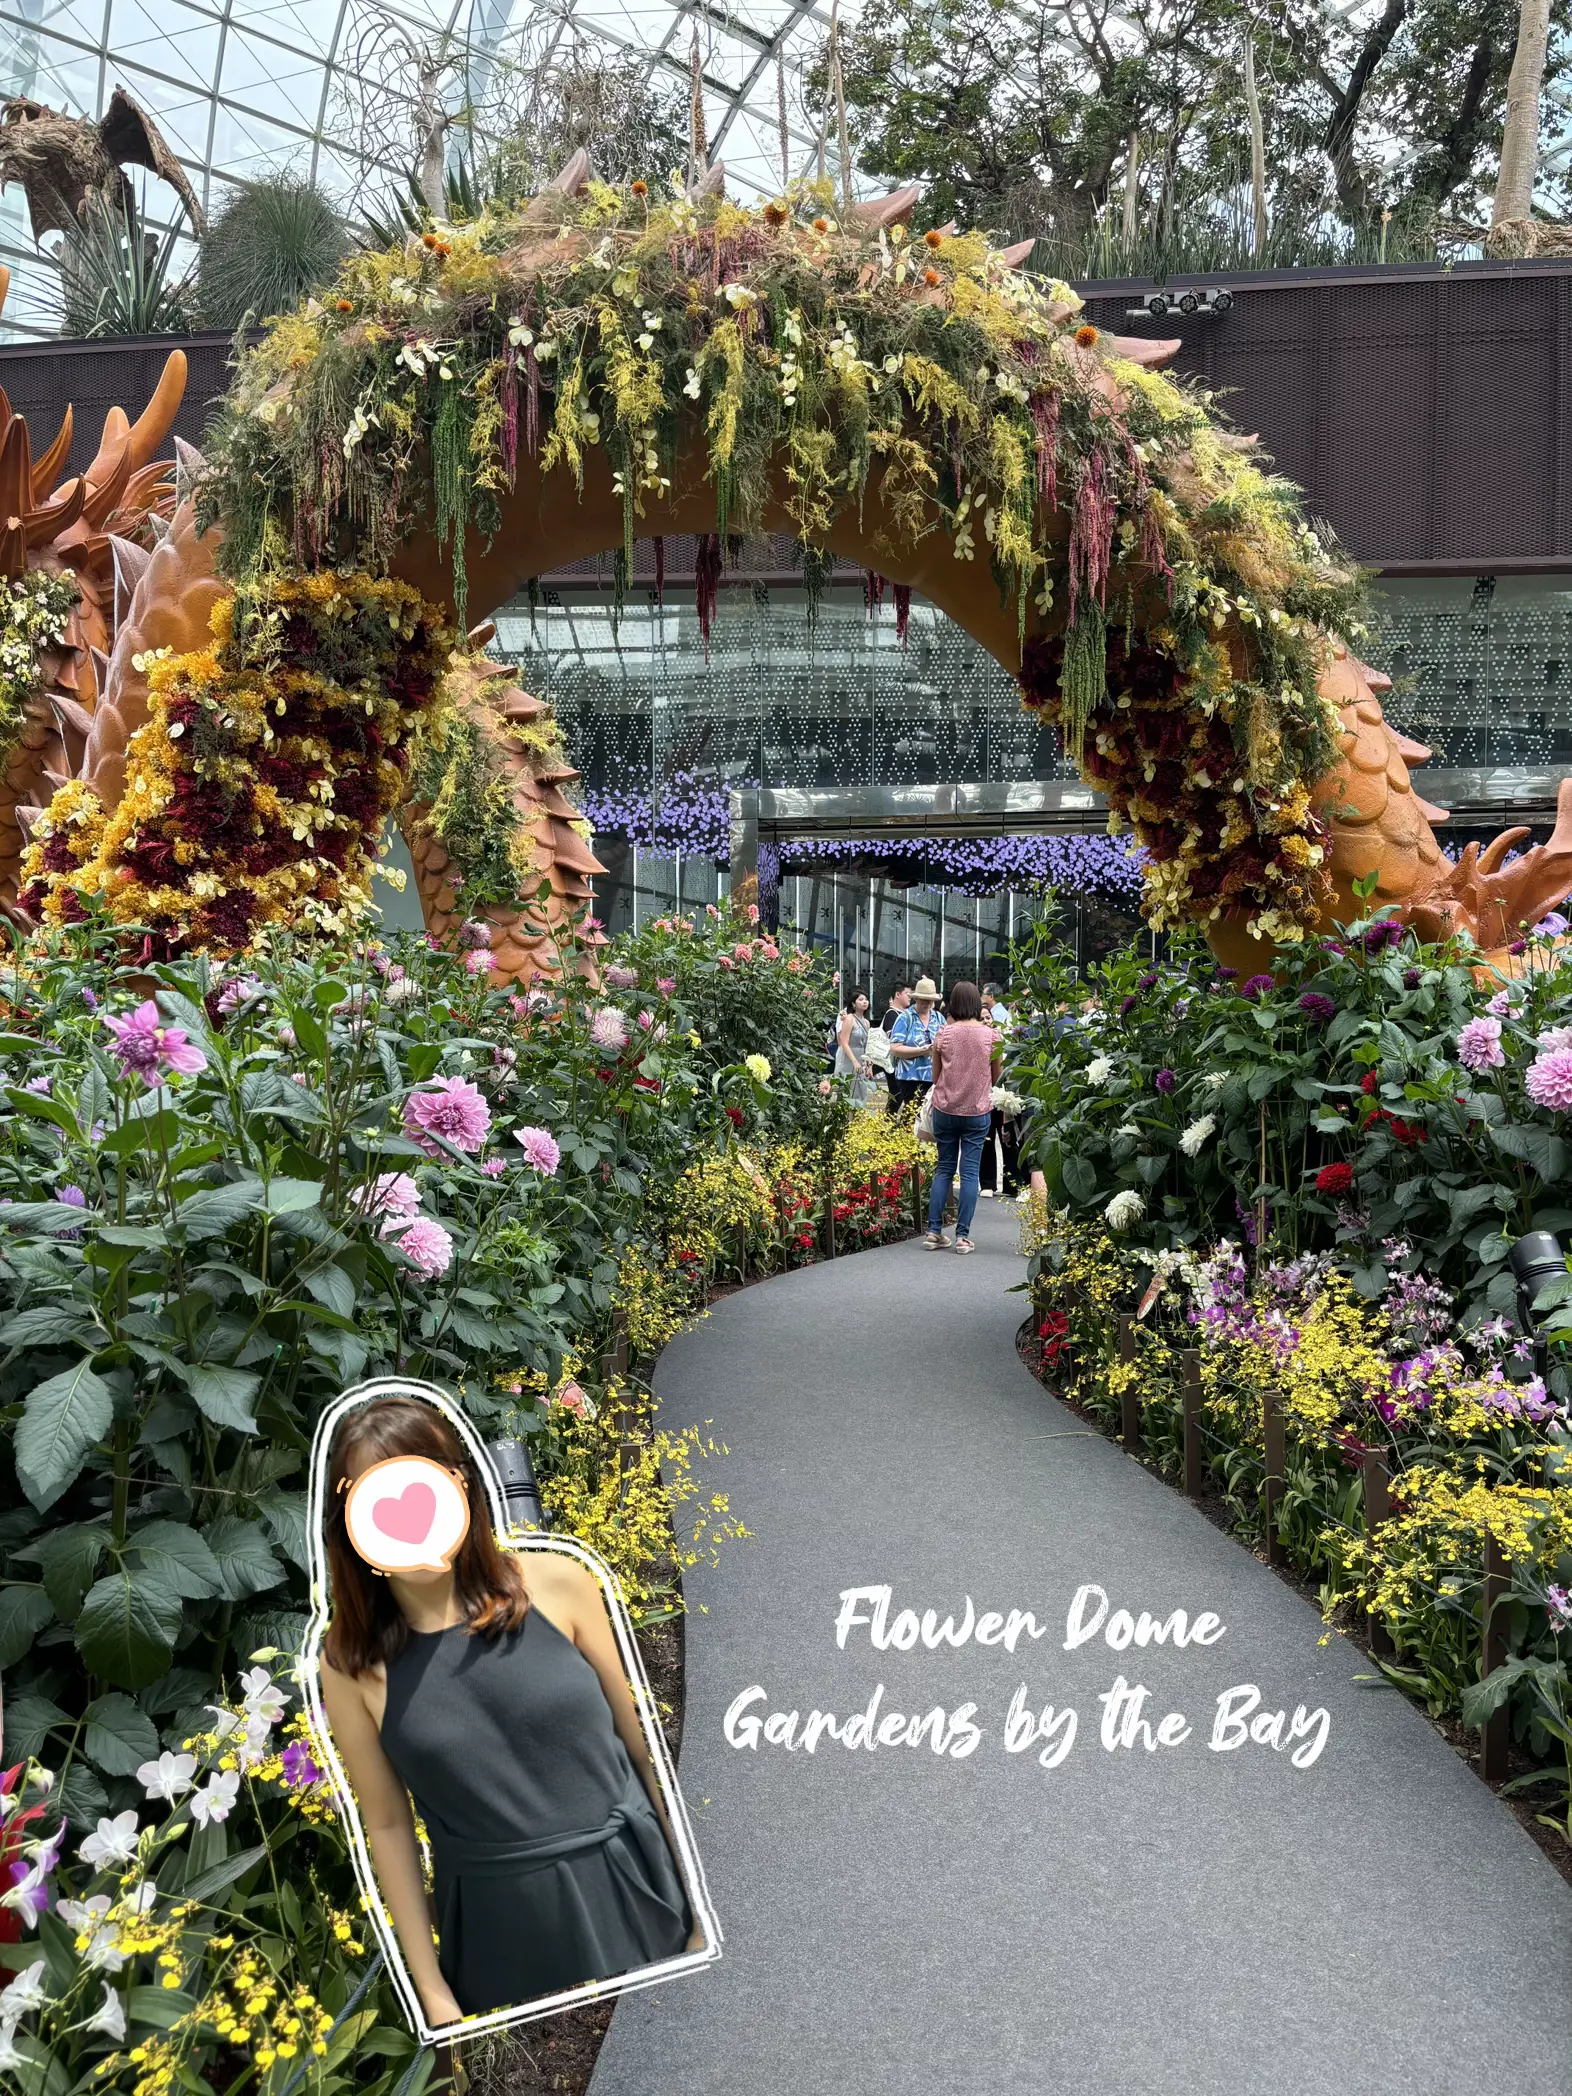 Flower Dome - Gardens by the Bay's images